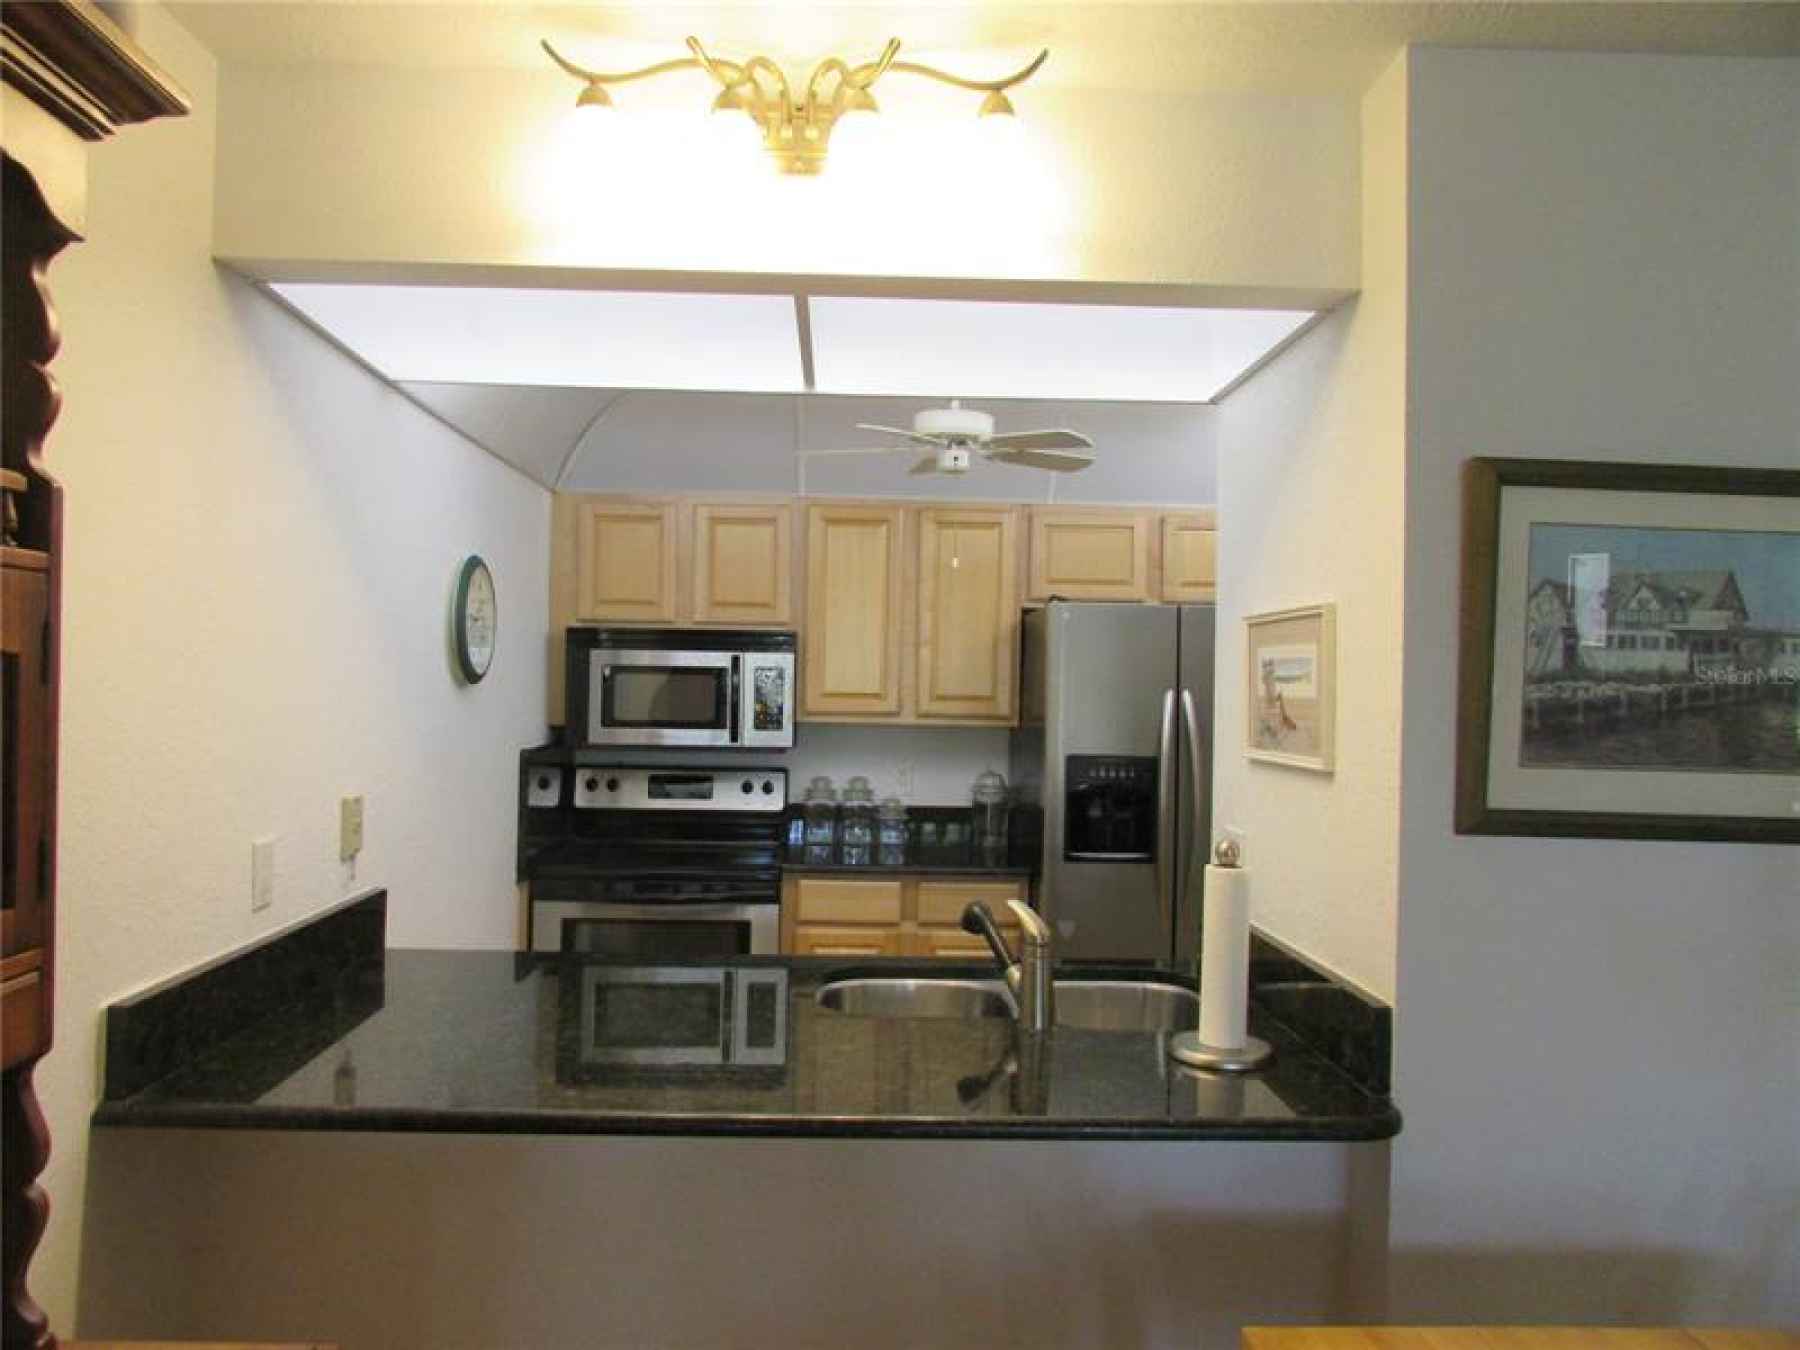 Overlook of kitchen from Dining area